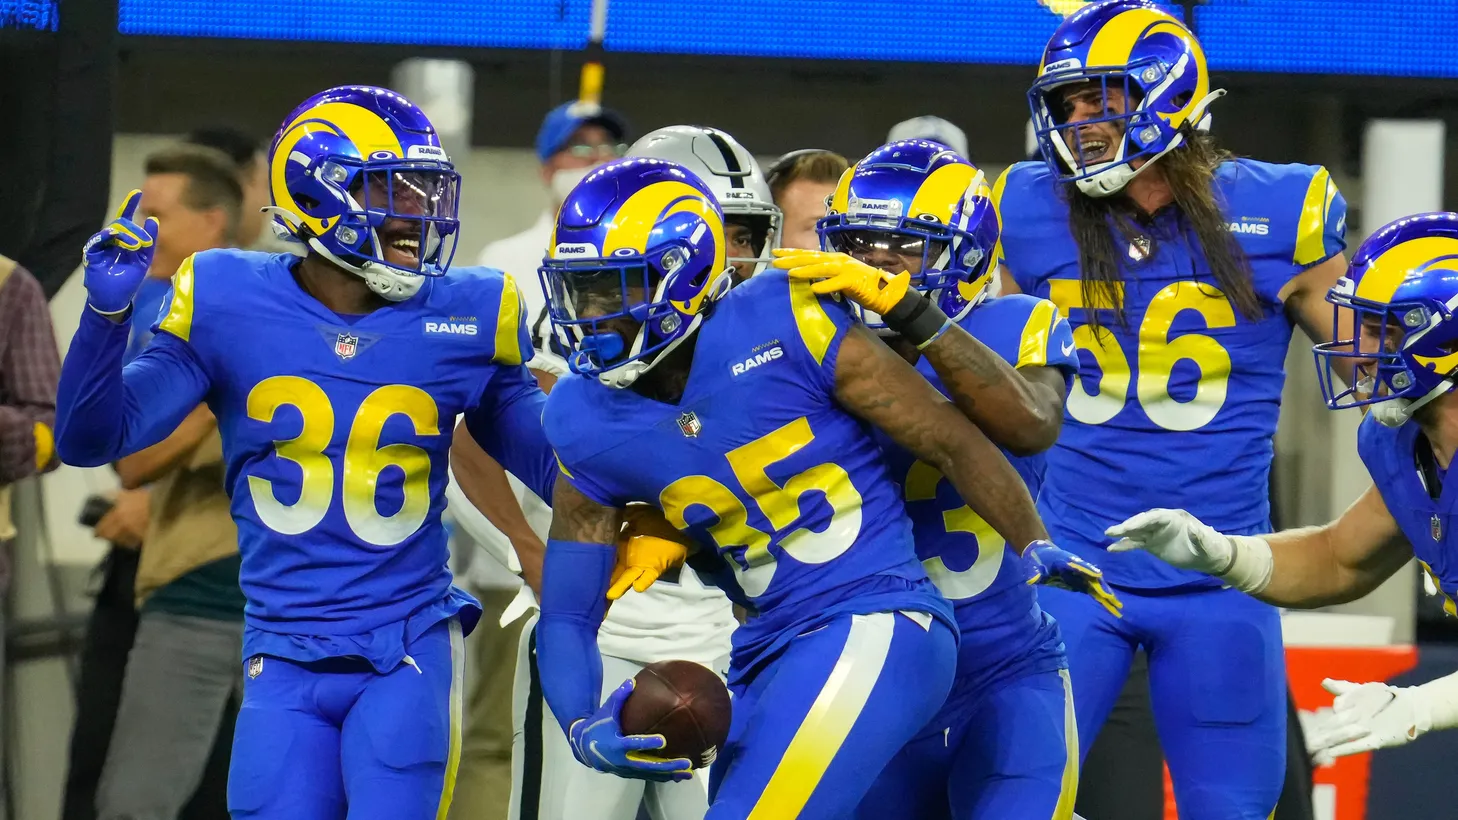 Los Angeles Rams defensive back Brontae Harris (35) celebrates after intercepting a pass against the Las Vegas Raiders in the fourth quarter at SoFi Stadium, Aug 21, 2021.